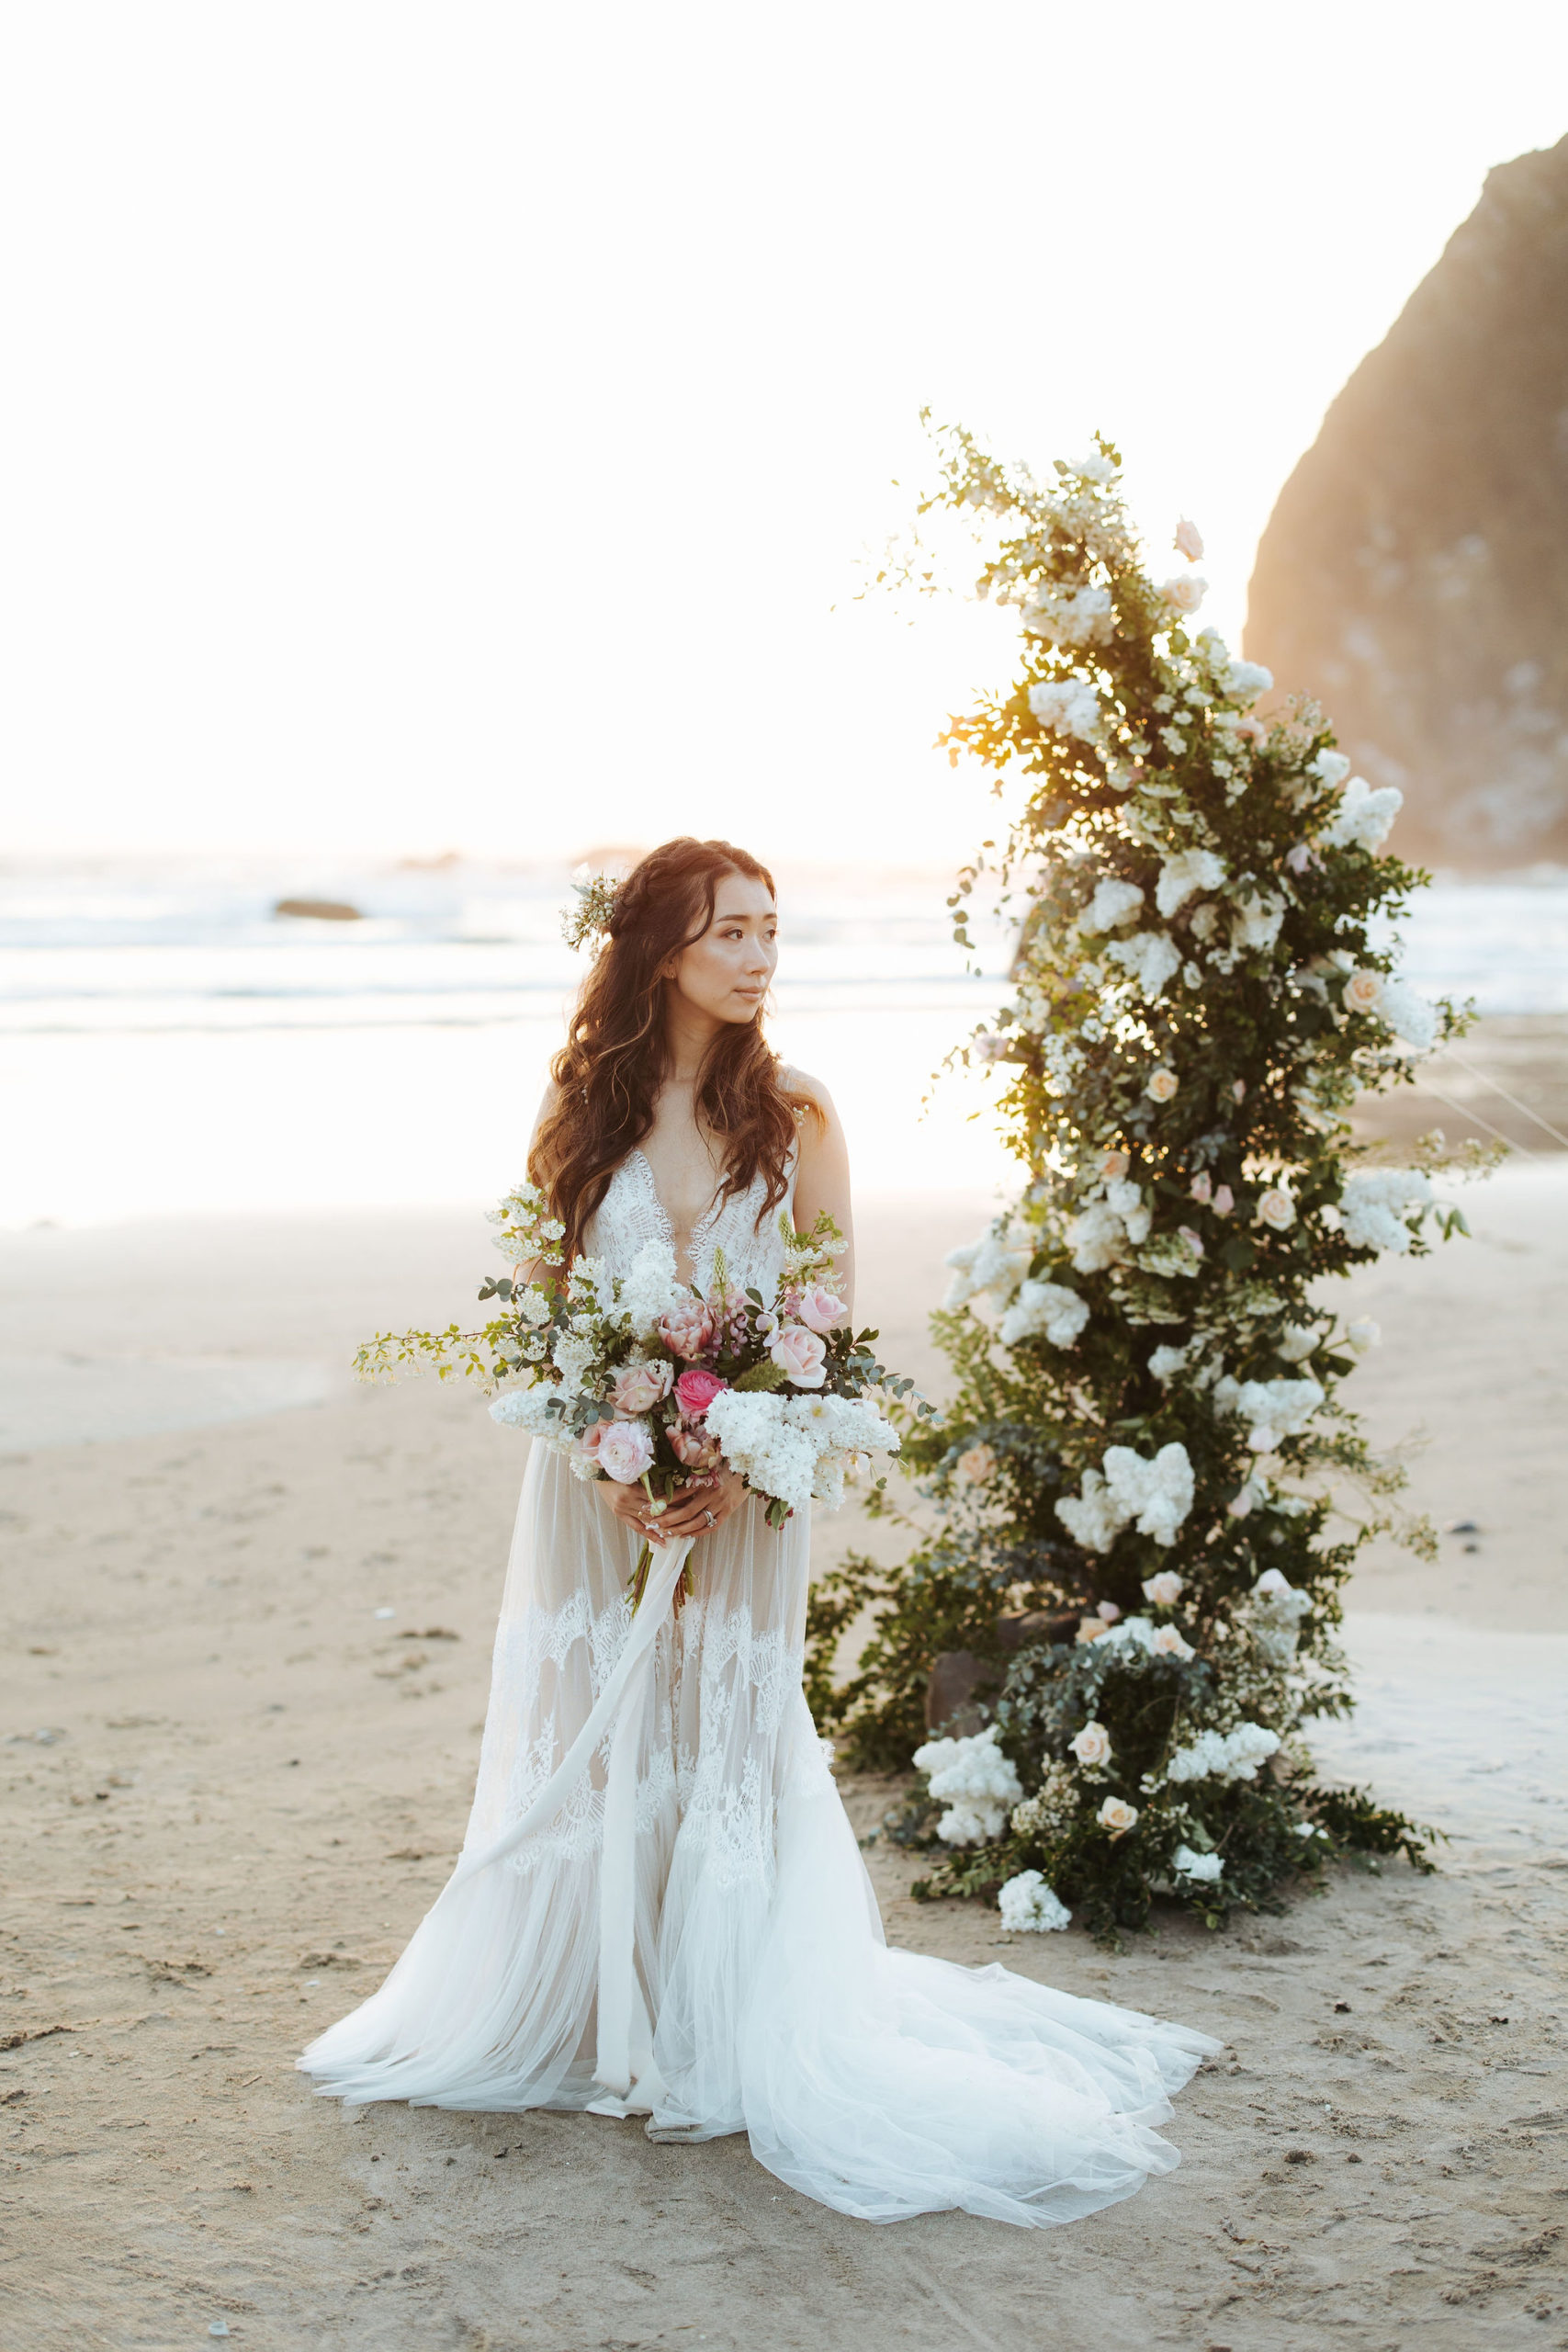 bride portrait on beach with flower arch and candlesbride portrait on beach with flower arch and candles